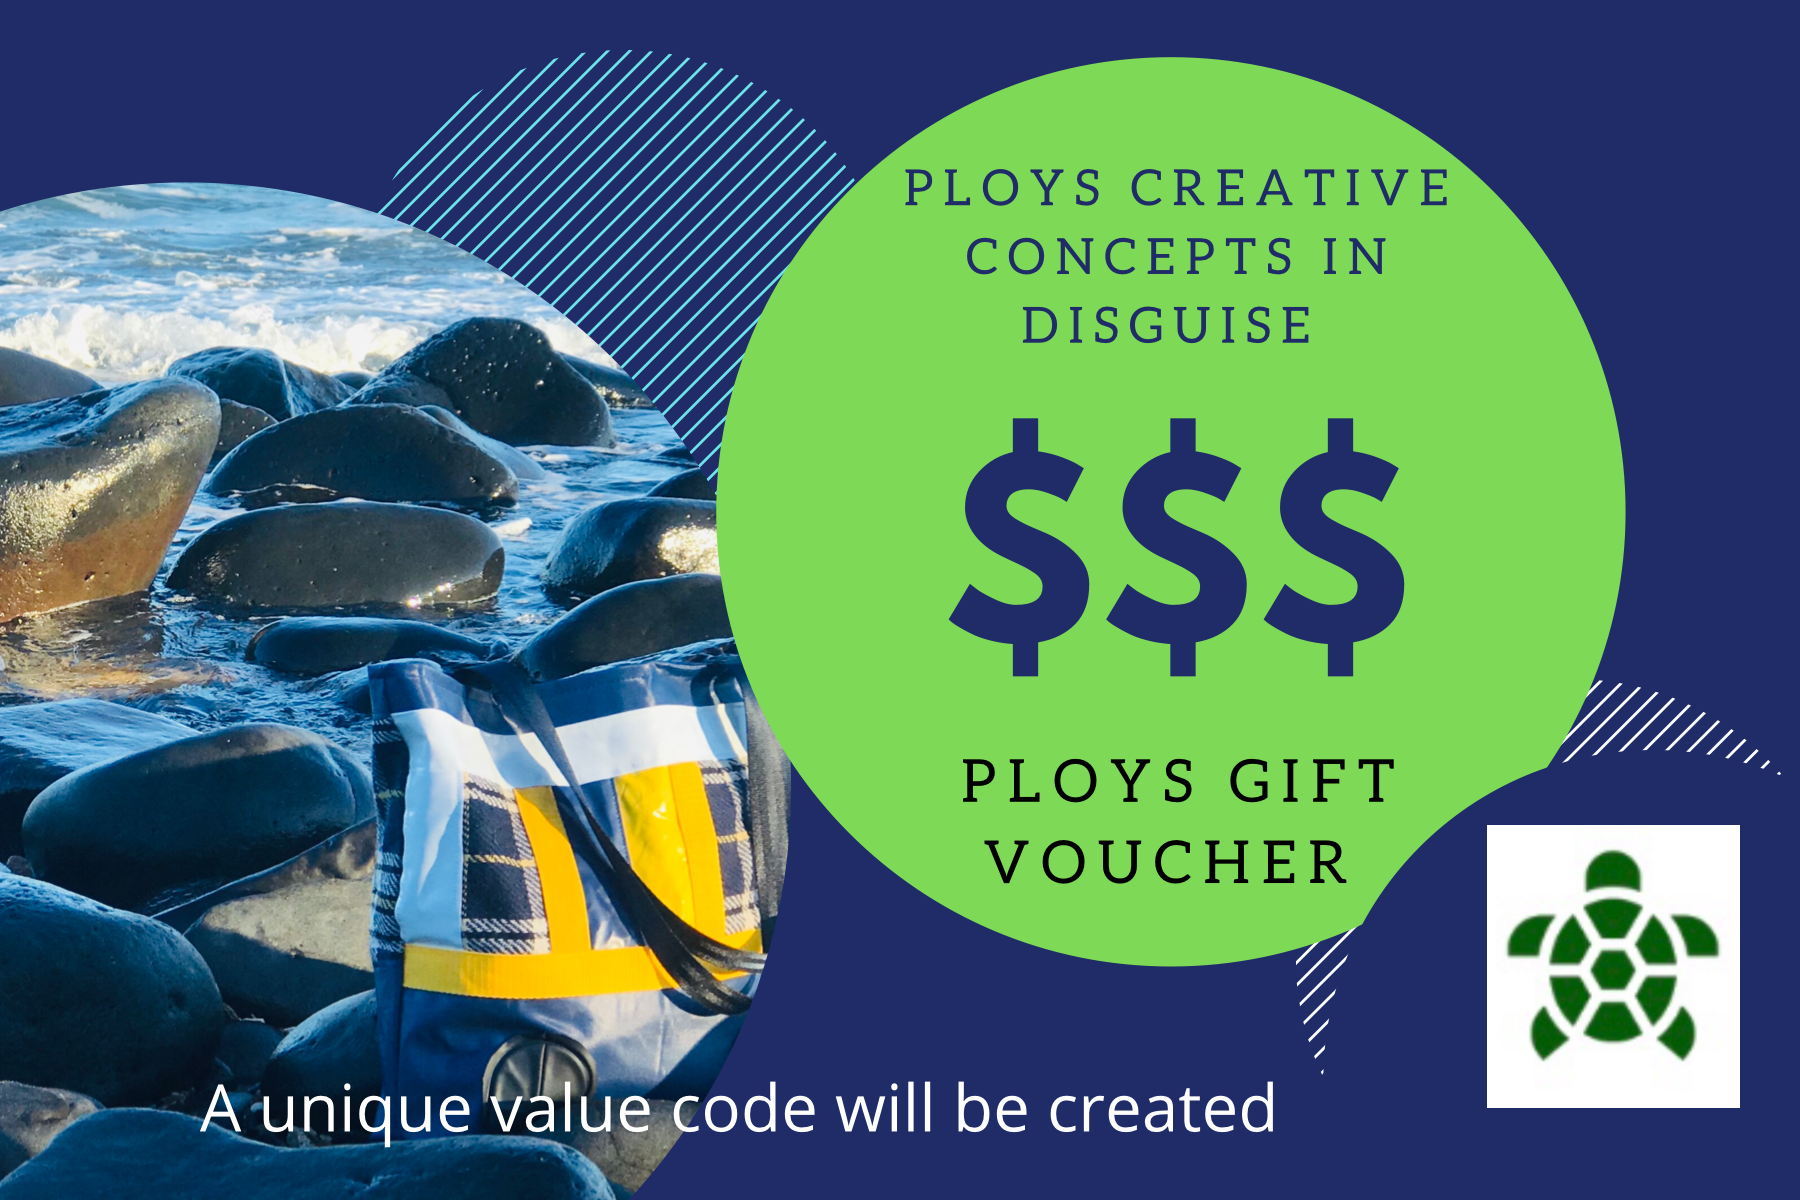 PLOYS bags from recycled pool inflatables gift vouchers 